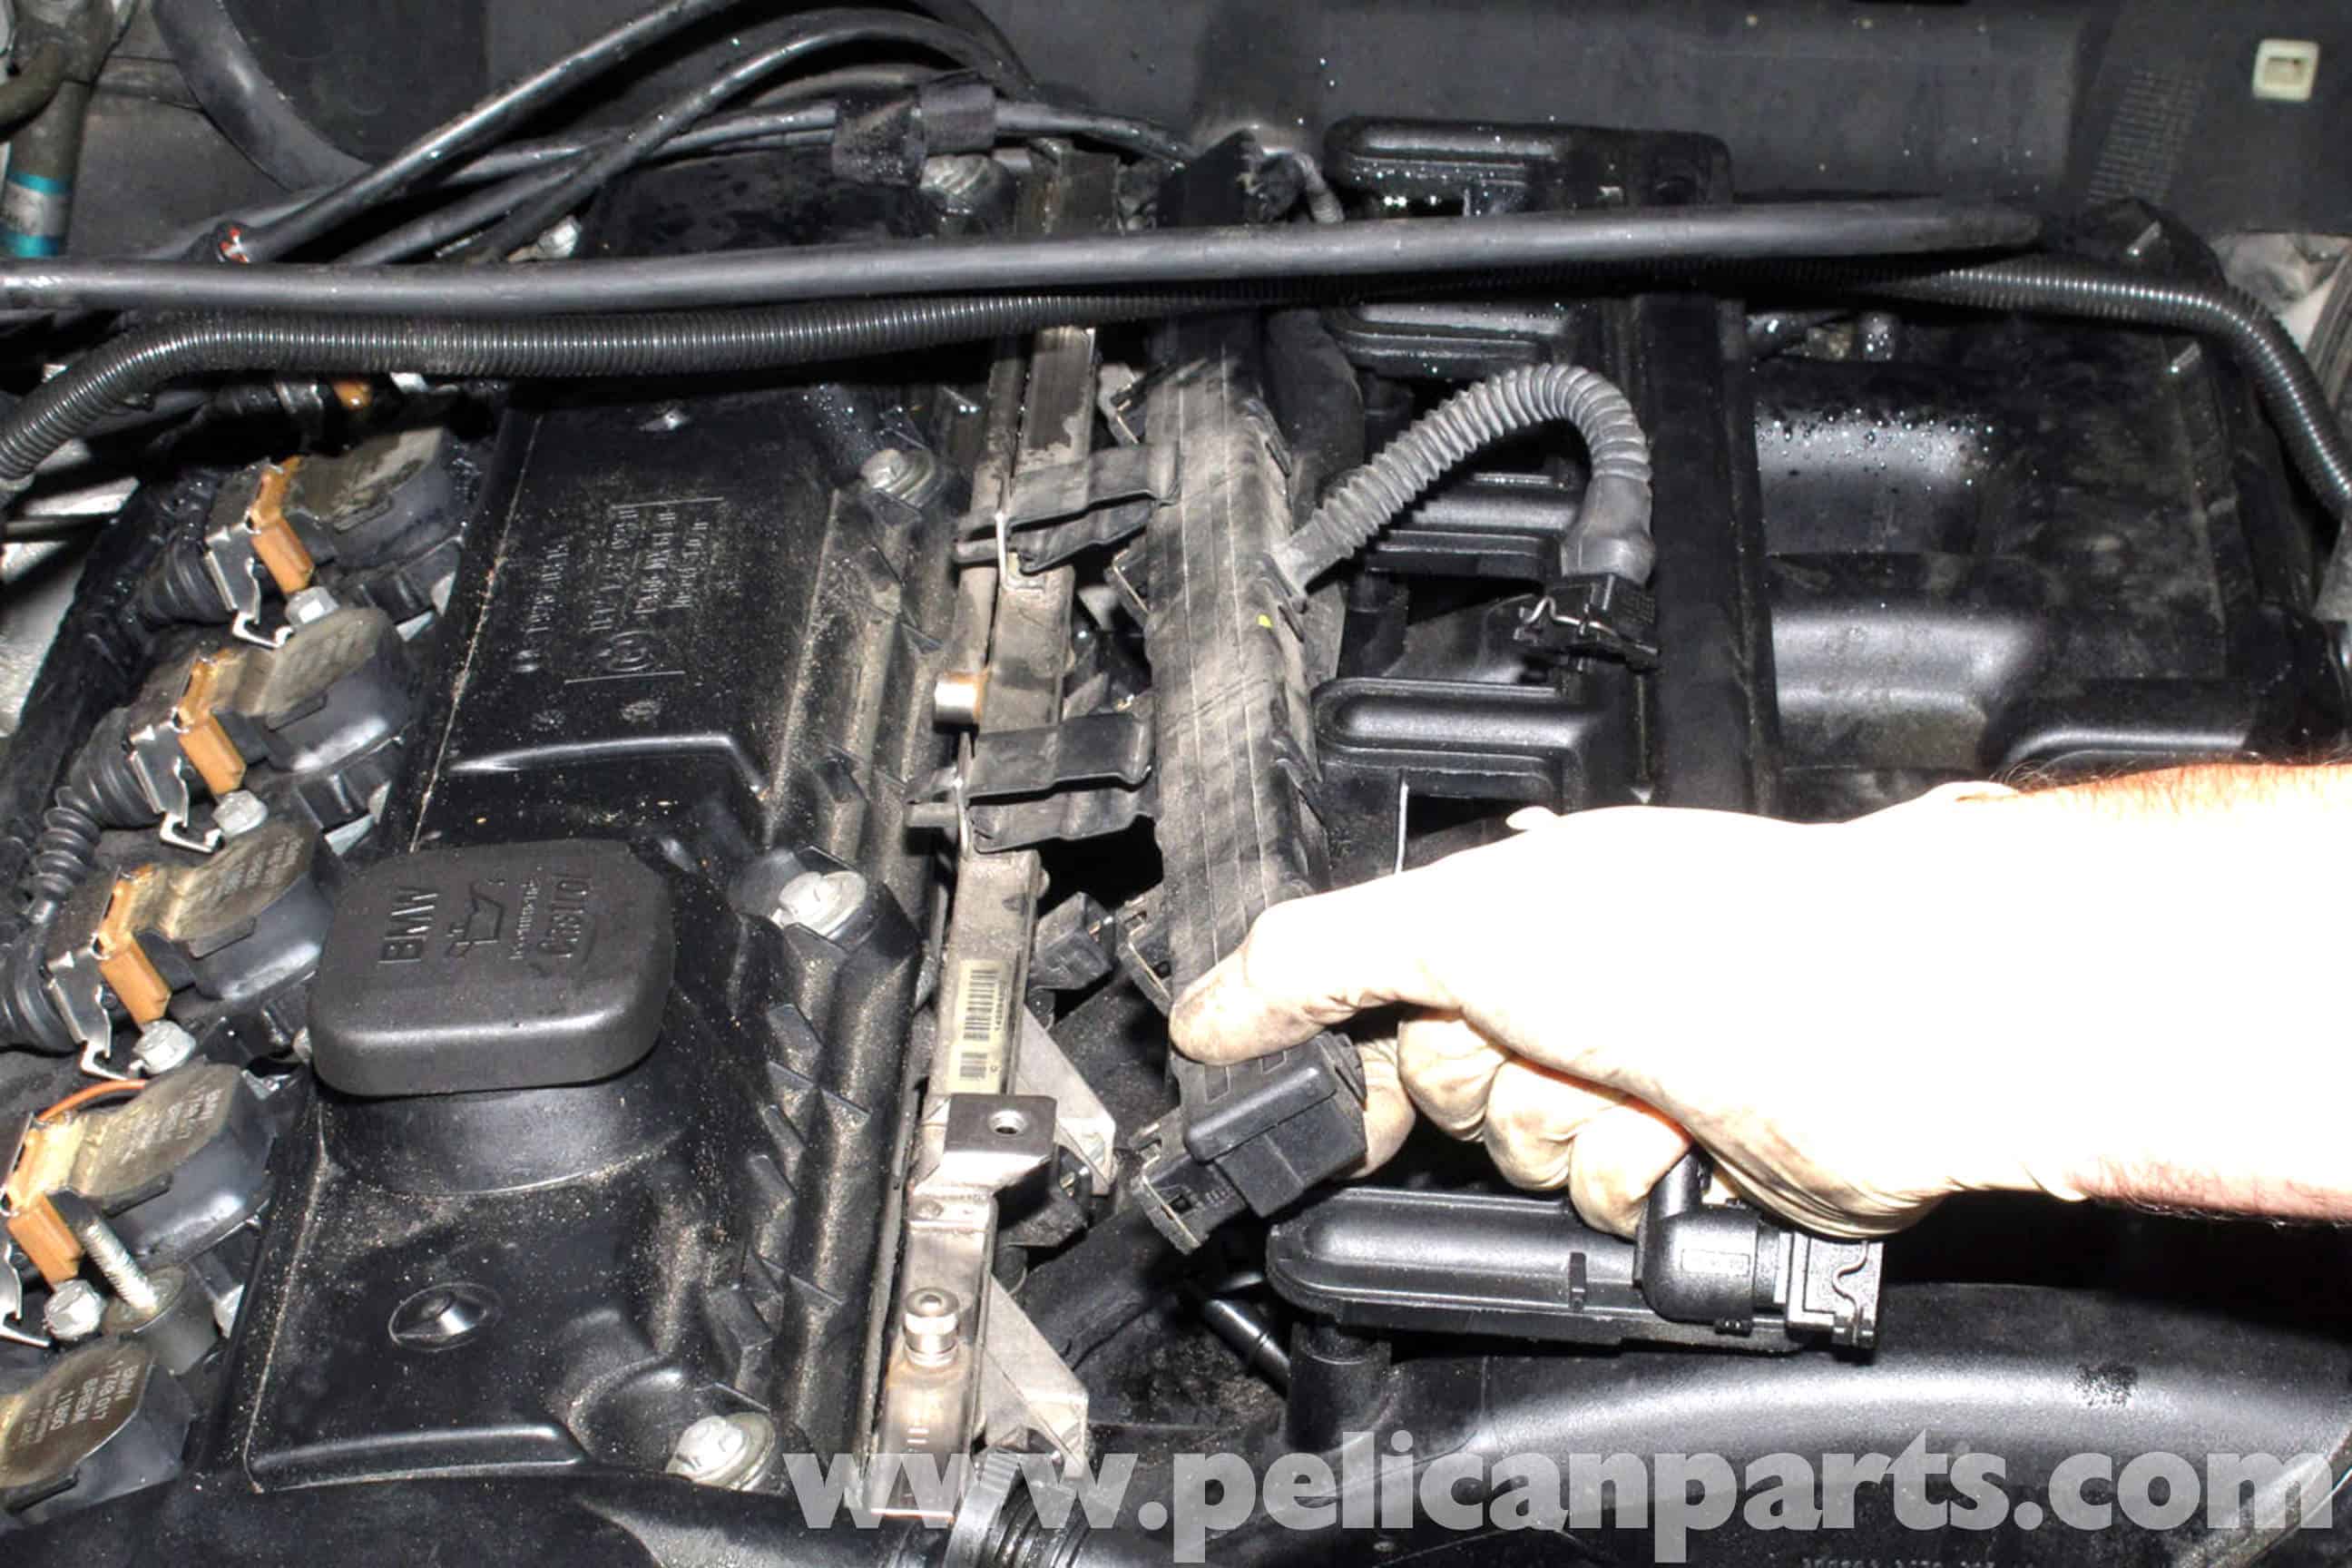 Clean Fuel Injectors in your Car